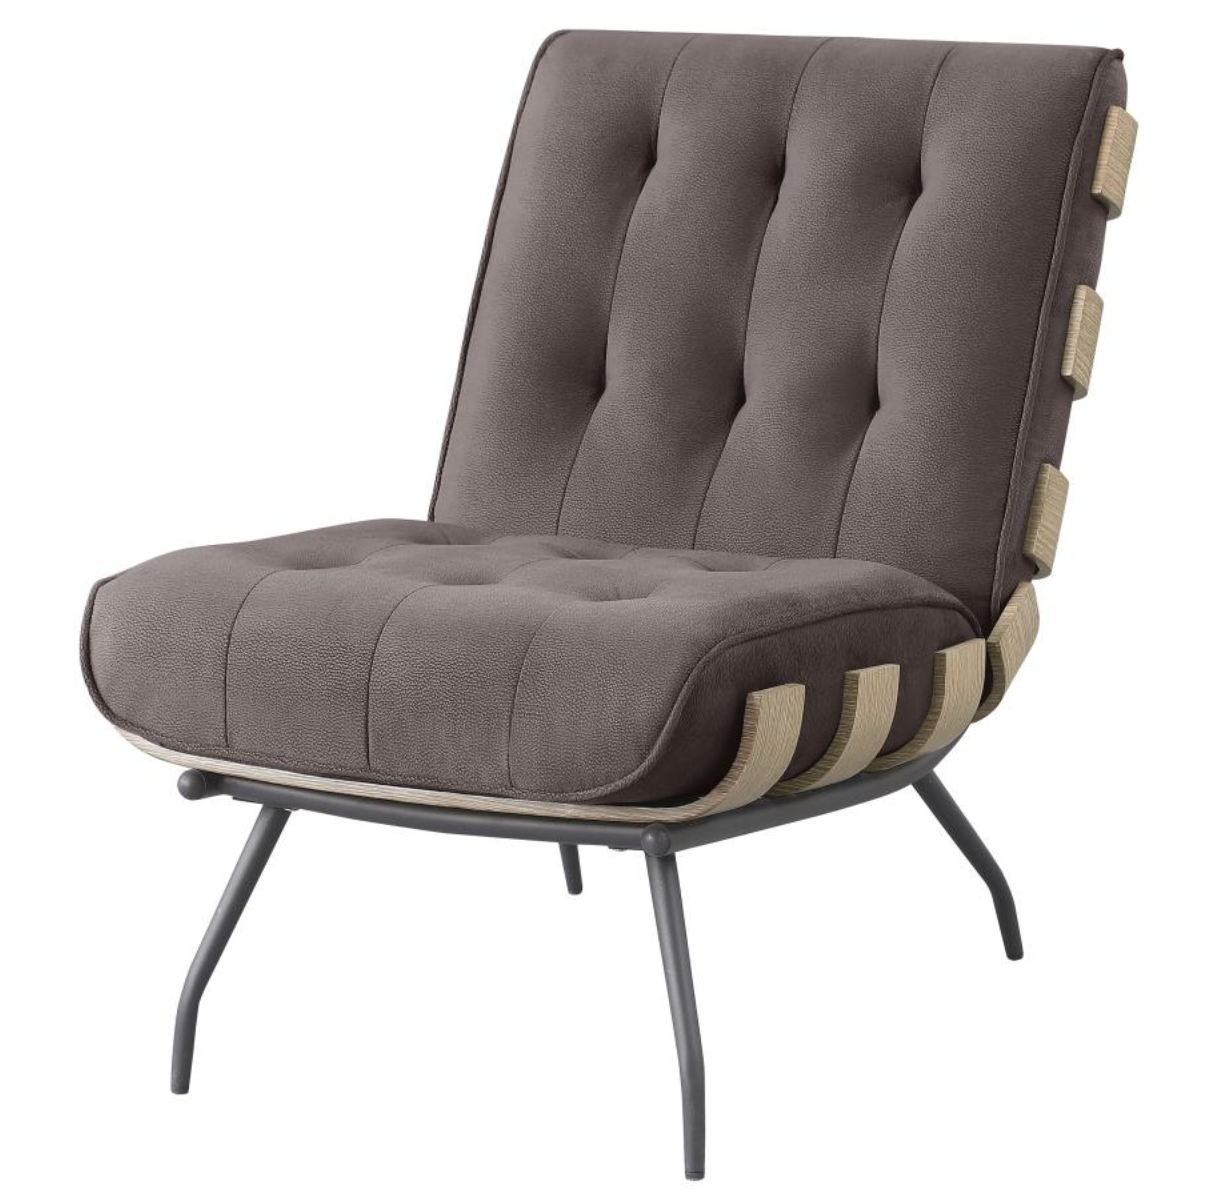 ALOMA Armless Tufted Accent Chair Brown